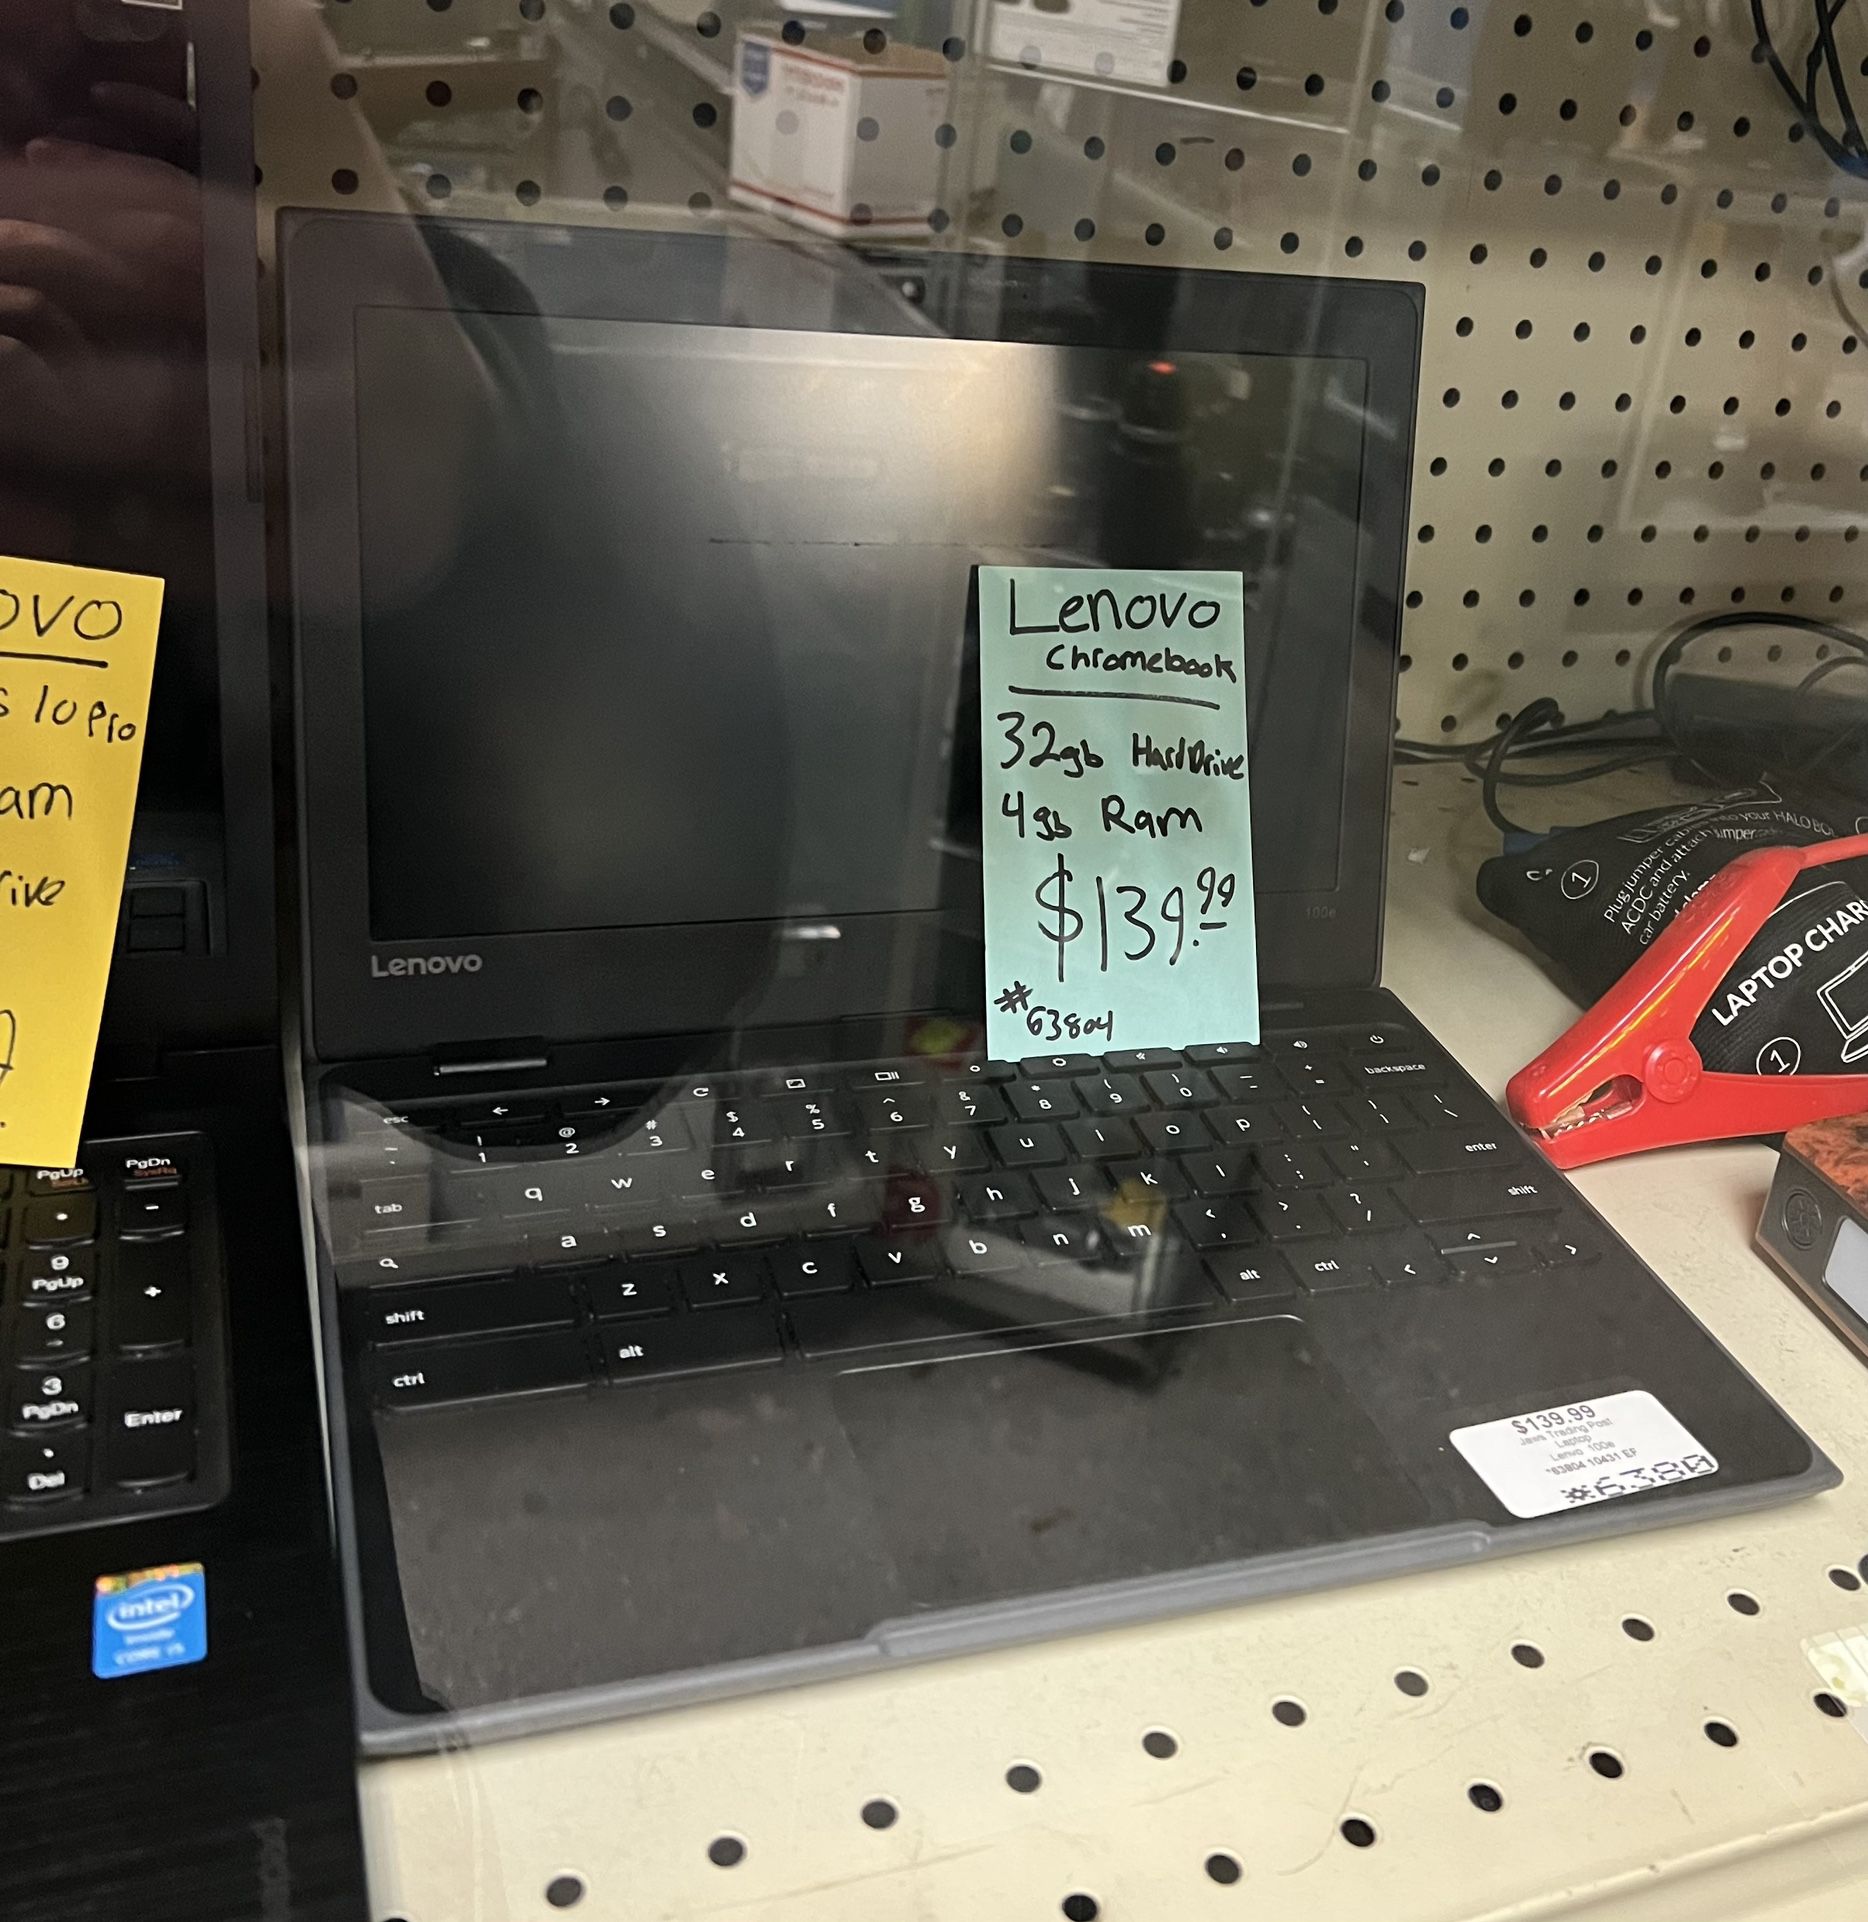 Lenovo Chromebook Laptop Pick Up Only Other Laptops For Sale Come Stop By And Take A Look!